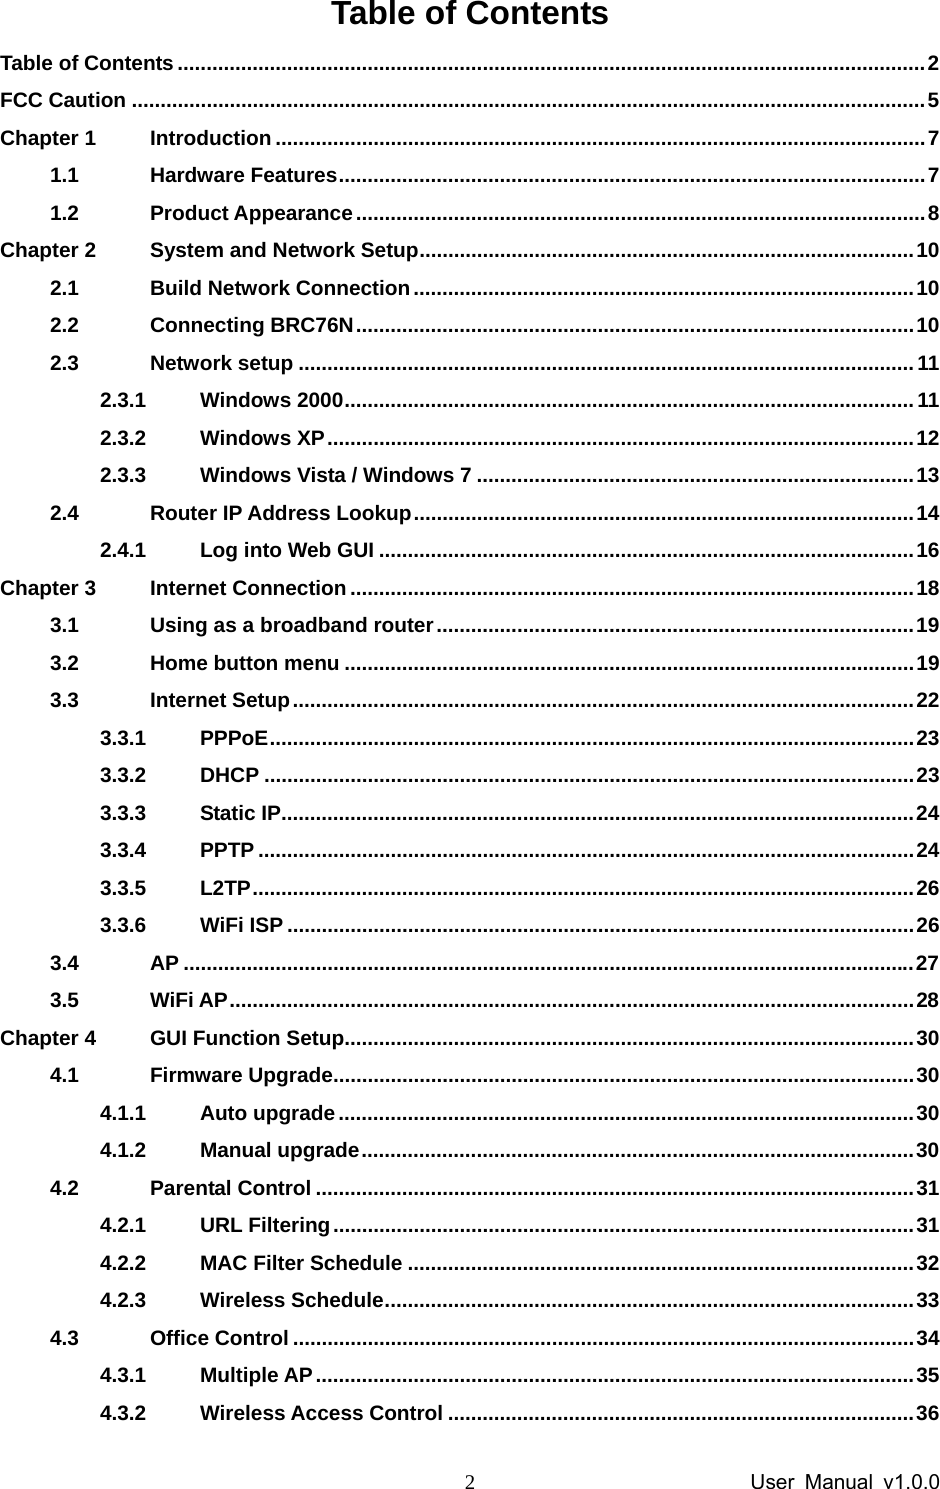                 User Manual v1.0.0 2Table of Contents Table of Contents ..................................................................................................................................2 FCC Caution ..........................................................................................................................................5 Chapter 1 Introduction .................................................................................................................7 1.1 Hardware Features......................................................................................................7 1.2 Product Appearance...................................................................................................8 Chapter 2 System and Network Setup......................................................................................10 2.1 Build Network Connection.......................................................................................10 2.2 Connecting BRC76N.................................................................................................10 2.3 Network setup ...........................................................................................................11 2.3.1 Windows 2000...................................................................................................11 2.3.2 Windows XP......................................................................................................12 2.3.3 Windows Vista / Windows 7 ............................................................................13 2.4 Router IP Address Lookup.......................................................................................14 2.4.1 Log into Web GUI .............................................................................................16 Chapter 3 Internet Connection..................................................................................................18 3.1 Using as a broadband router...................................................................................19 3.2 Home button menu ...................................................................................................19 3.3 Internet Setup............................................................................................................22 3.3.1 PPPoE................................................................................................................23 3.3.2 DHCP .................................................................................................................23 3.3.3 Static IP..............................................................................................................24 3.3.4 PPTP ..................................................................................................................24 3.3.5 L2TP...................................................................................................................26 3.3.6 WiFi ISP .............................................................................................................26 3.4 AP ...............................................................................................................................27 3.5 WiFi AP.......................................................................................................................28 Chapter 4 GUI Function Setup...................................................................................................30 4.1 Firmware Upgrade.....................................................................................................30 4.1.1 Auto upgrade....................................................................................................30 4.1.2 Manual upgrade................................................................................................30 4.2 Parental Control ........................................................................................................31 4.2.1 URL Filtering.....................................................................................................31 4.2.2 MAC Filter Schedule ........................................................................................32 4.2.3 Wireless Schedule............................................................................................33 4.3 Office Control ............................................................................................................34 4.3.1 Multiple AP........................................................................................................35 4.3.2 Wireless Access Control .................................................................................36 